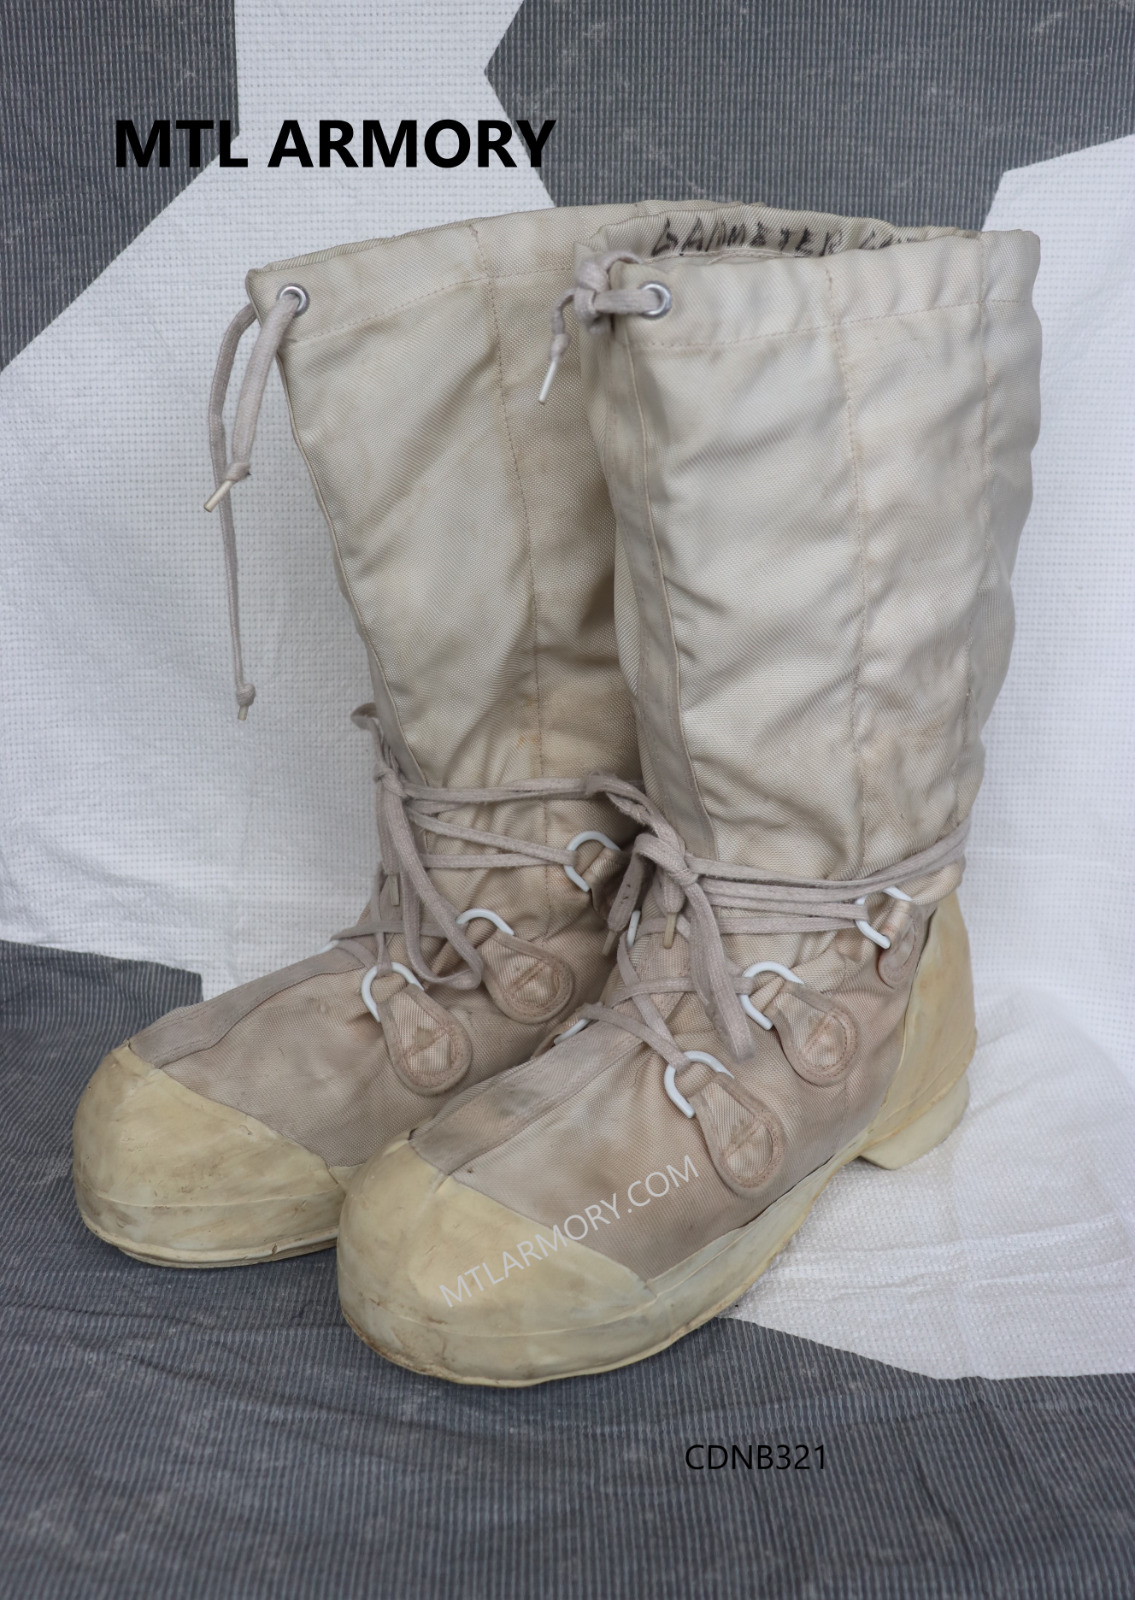 CANADIAN FORCES ISSUED MUKLUKS SIZE 10M CANADA ARMY  ( MTL ARMORY )